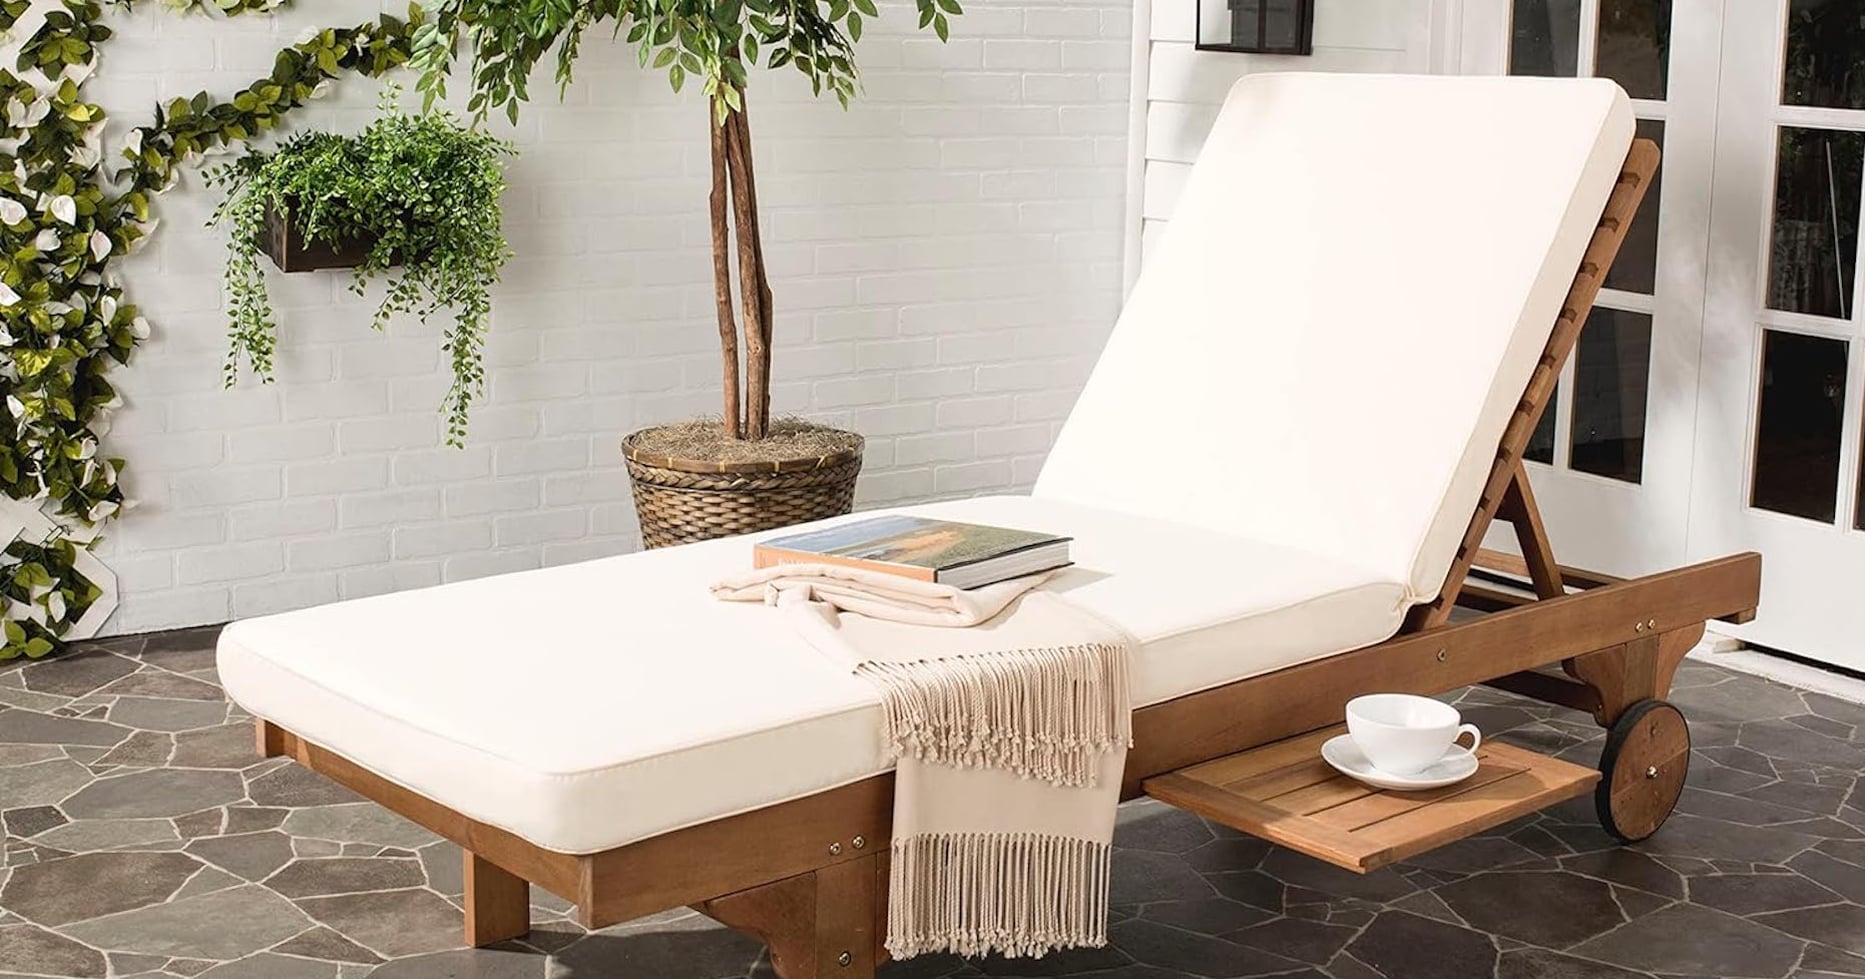 20 Chic Outdoor Furniture Finds You’ll Never Guess Are From Amazon